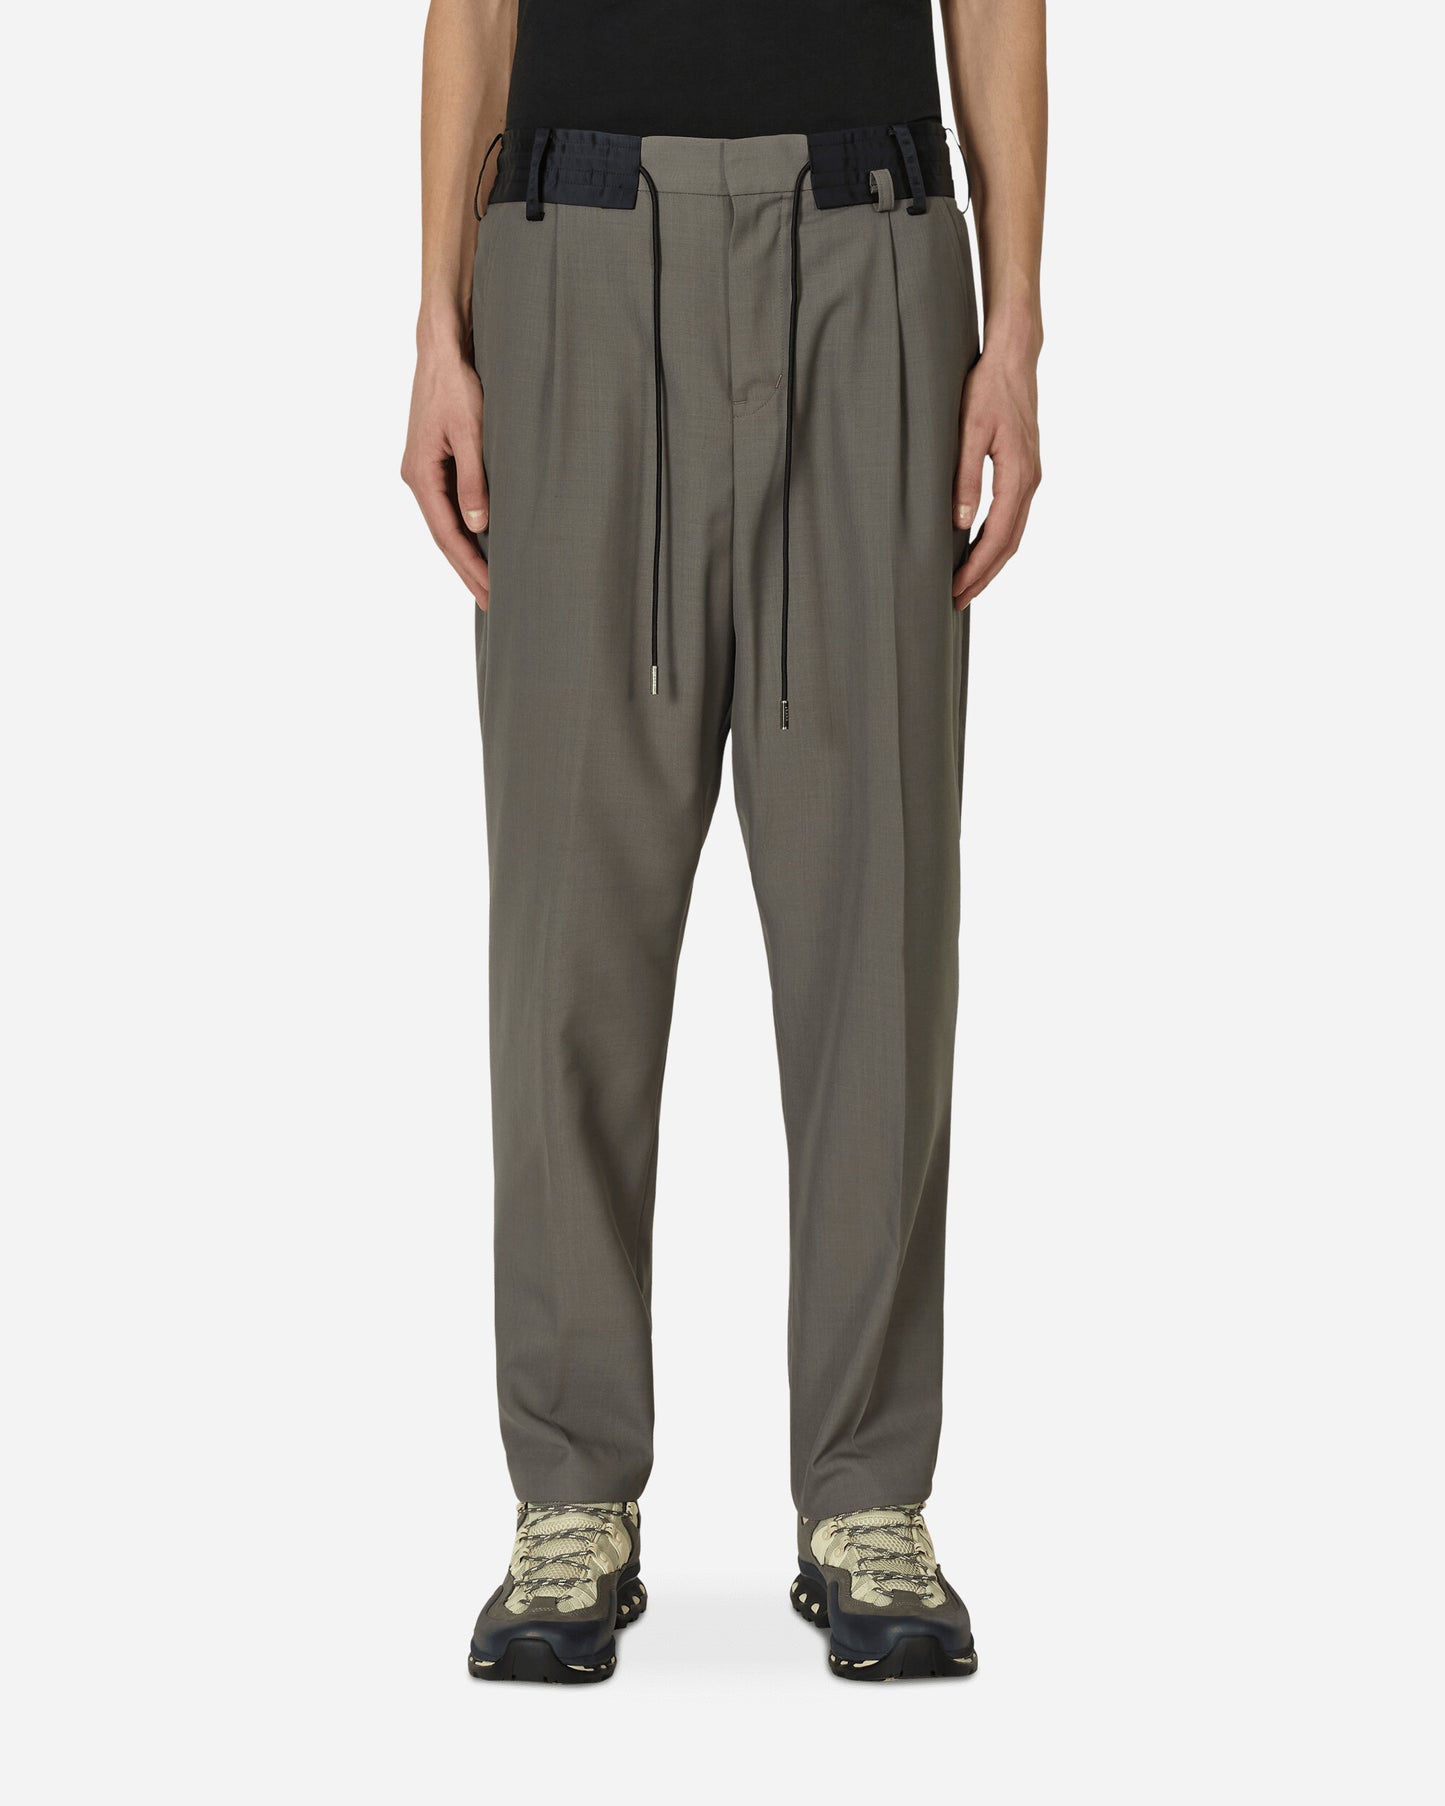 Sacai Suiting Pants Taupe Pants Trousers 23-02952M 550